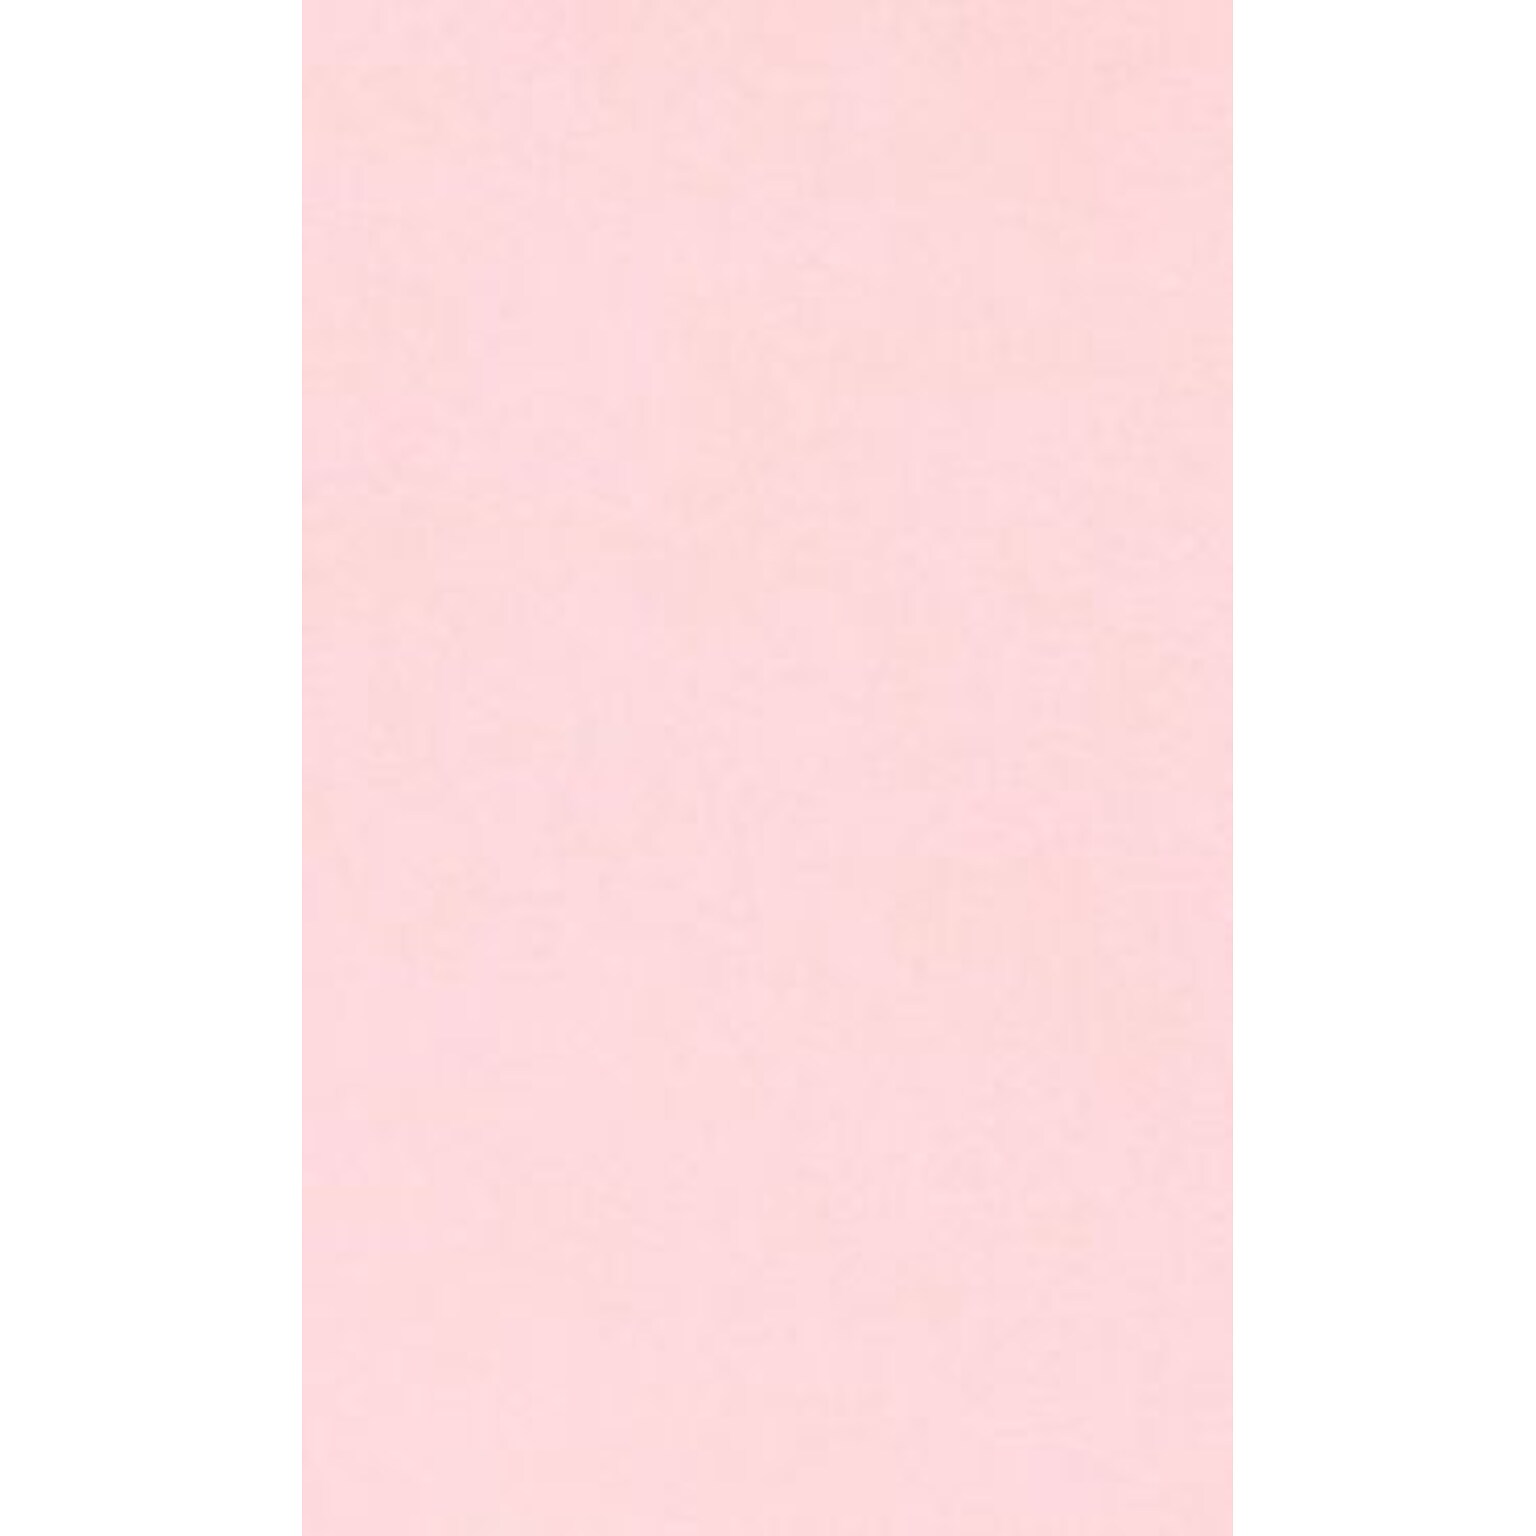 LUX 8.5 x 14 Multipurpose Paper, 32 lbs., Candy Pink, 250 Sheets/Pack (81214-P-14-250)